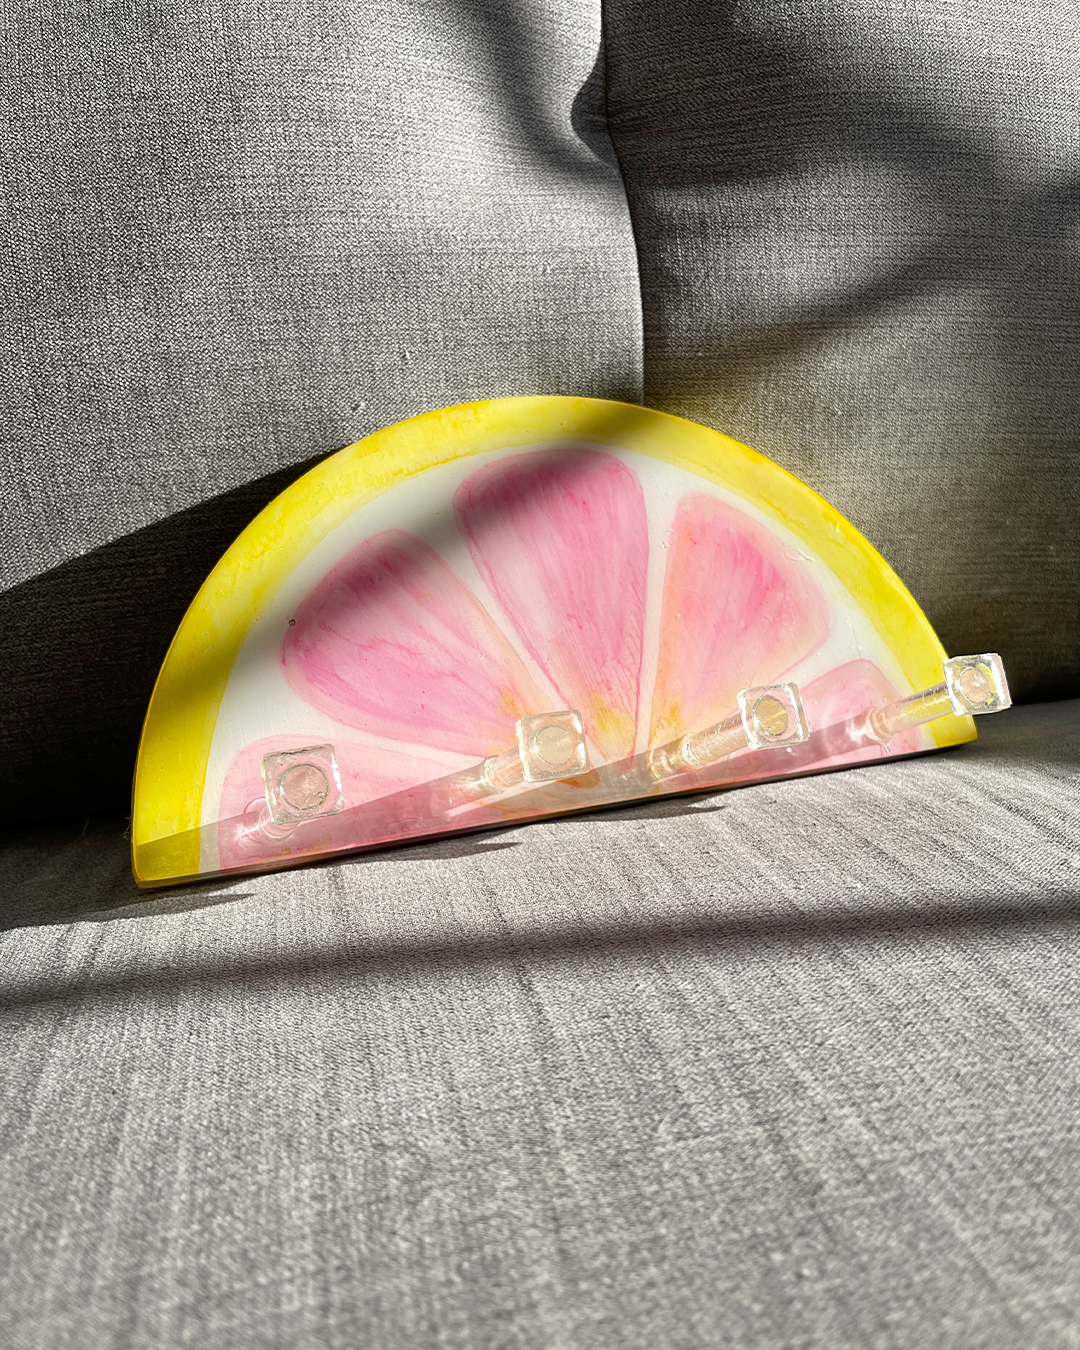 Artistic wooden key holder with vibrant pink grapefruit slice painting and hooks